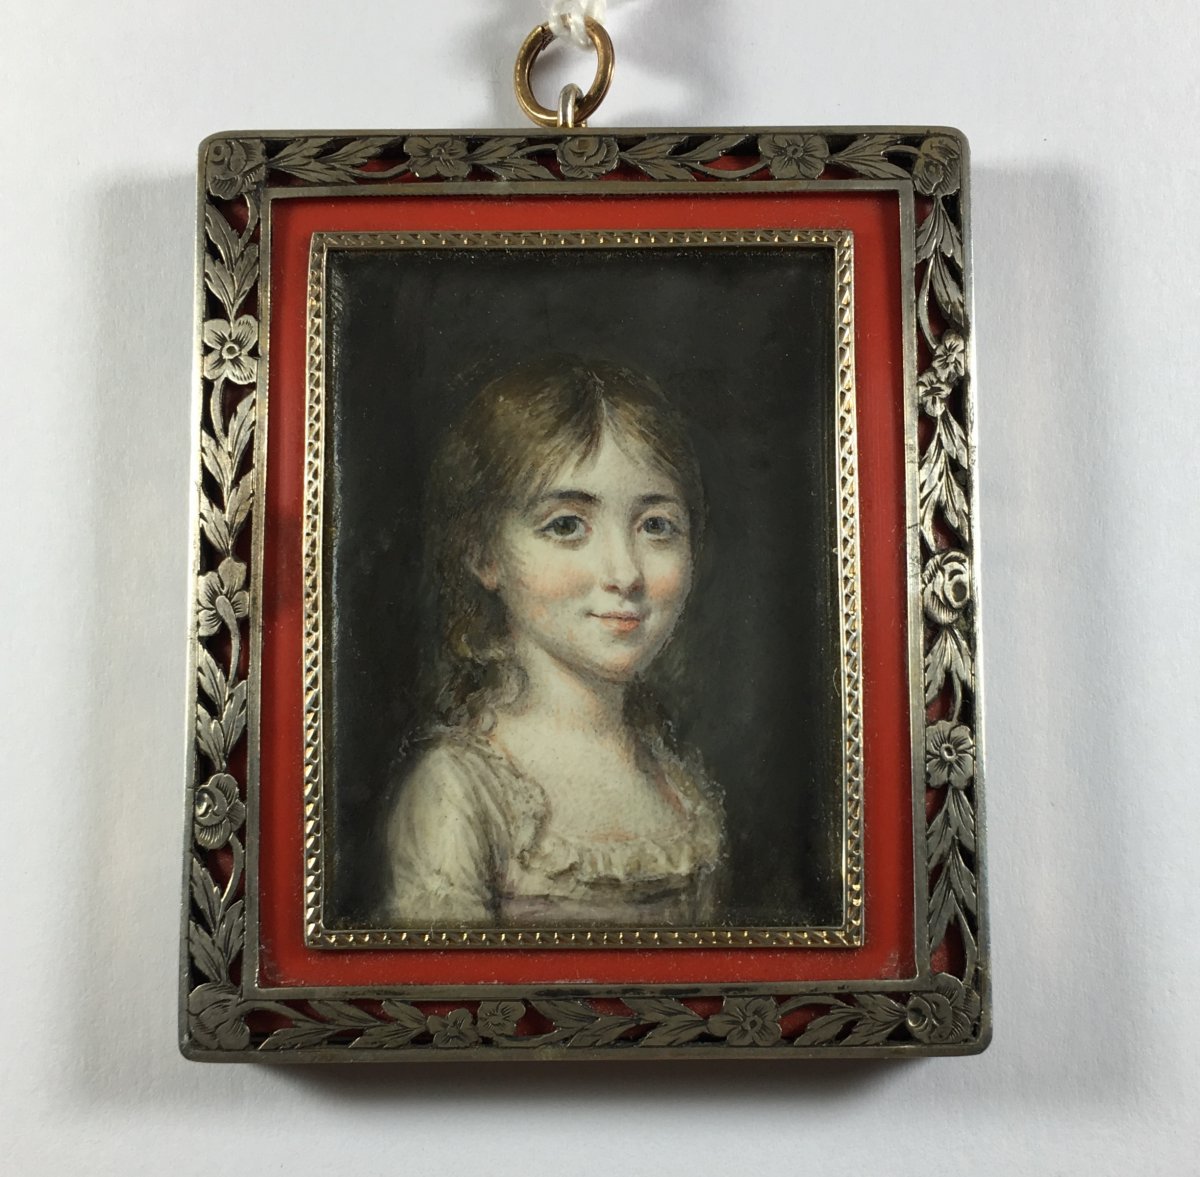 Portrait Of A Girl, Miniature  Early 19th Century, Silver (?) Frame